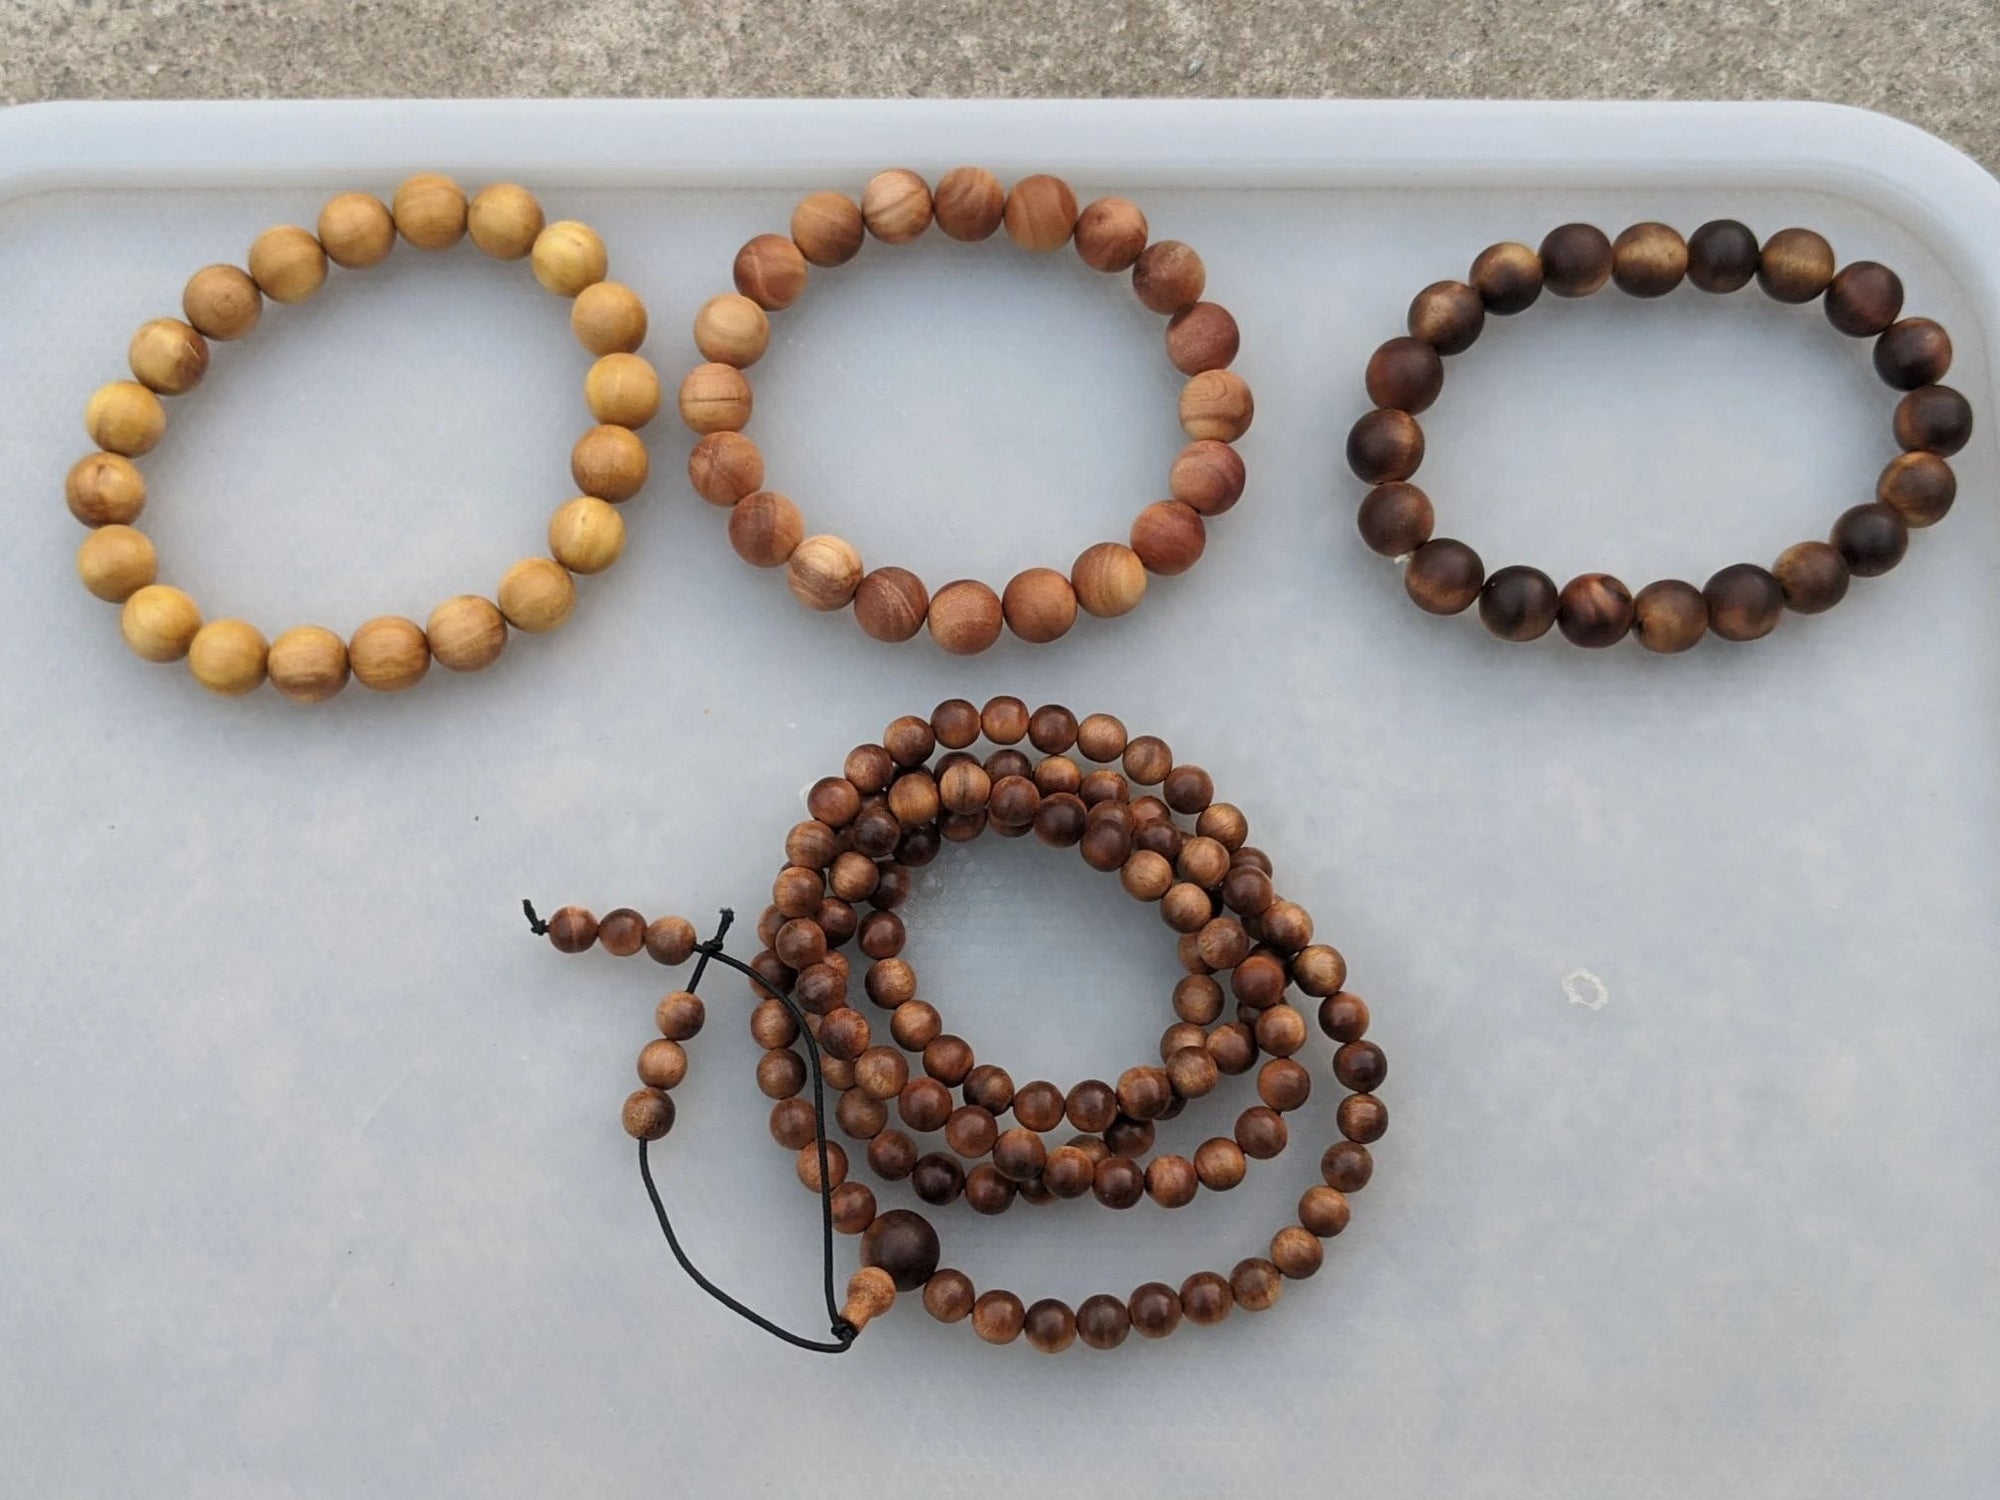 "The Beauty of the Death" Wild Aged Sandalwood beads -